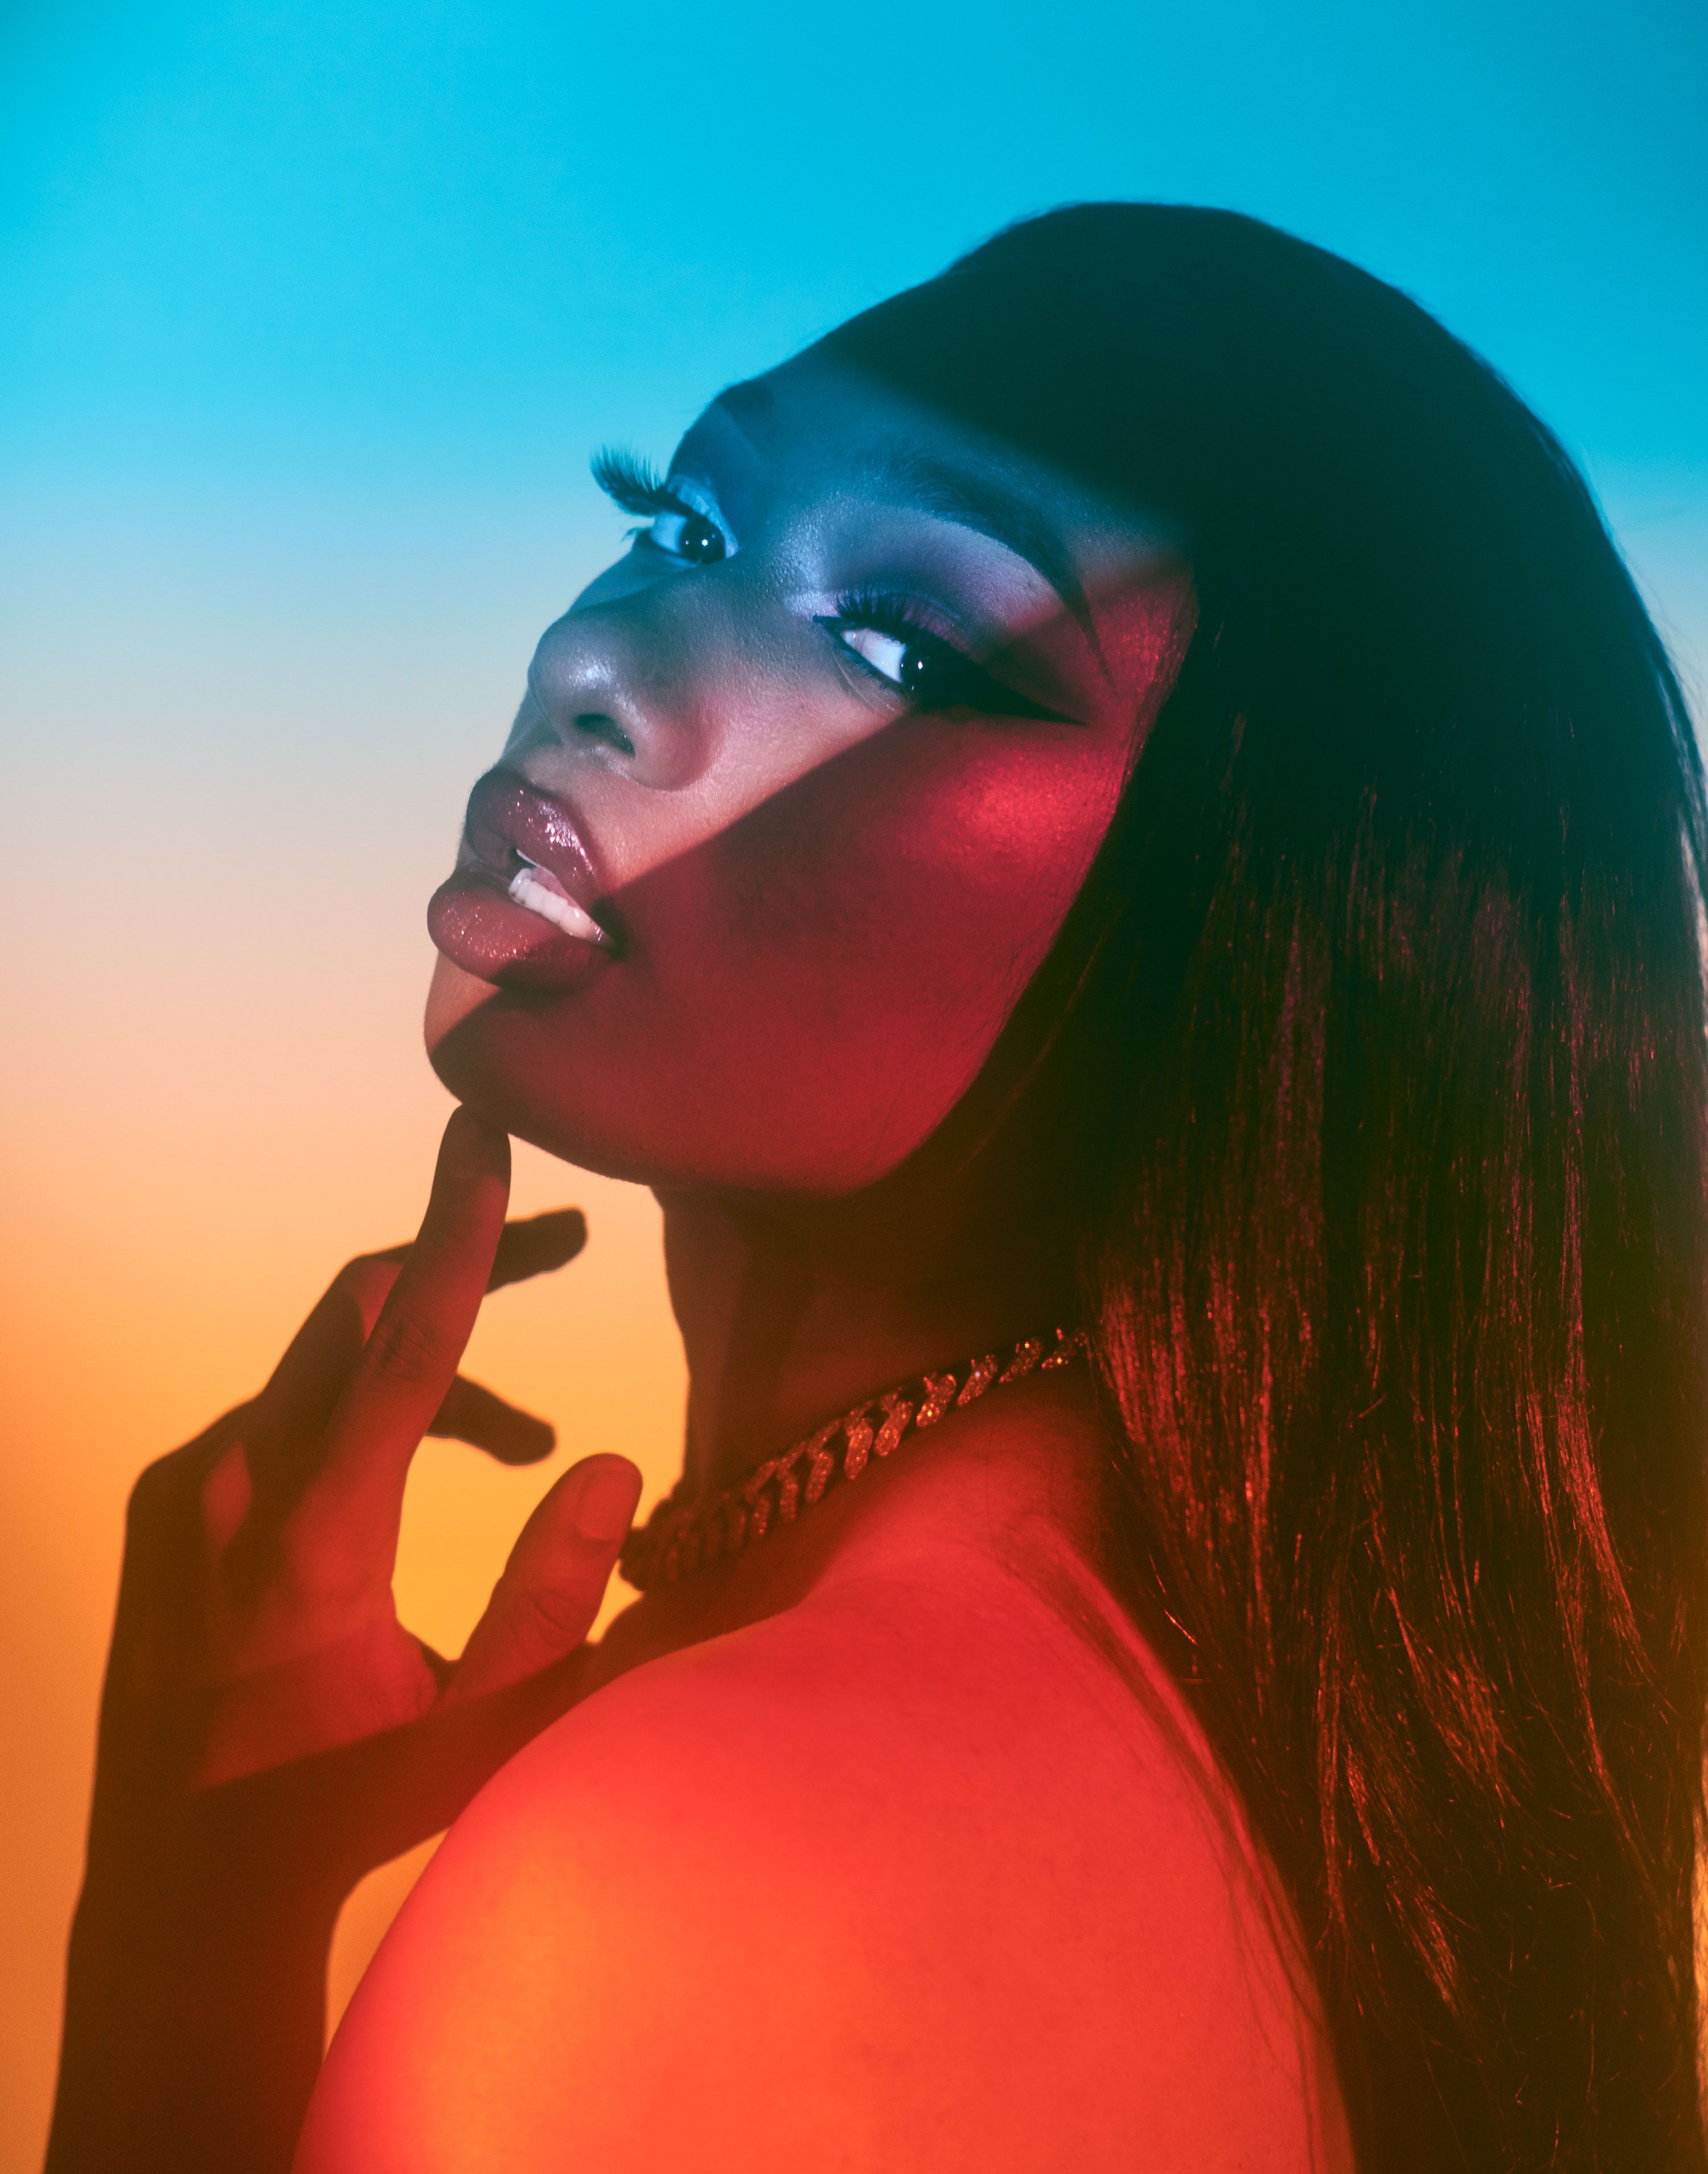 My Sexy Daughter Sucking - Megan Thee Stallion Profile: On 'Big Ole Freak' and Her Mom